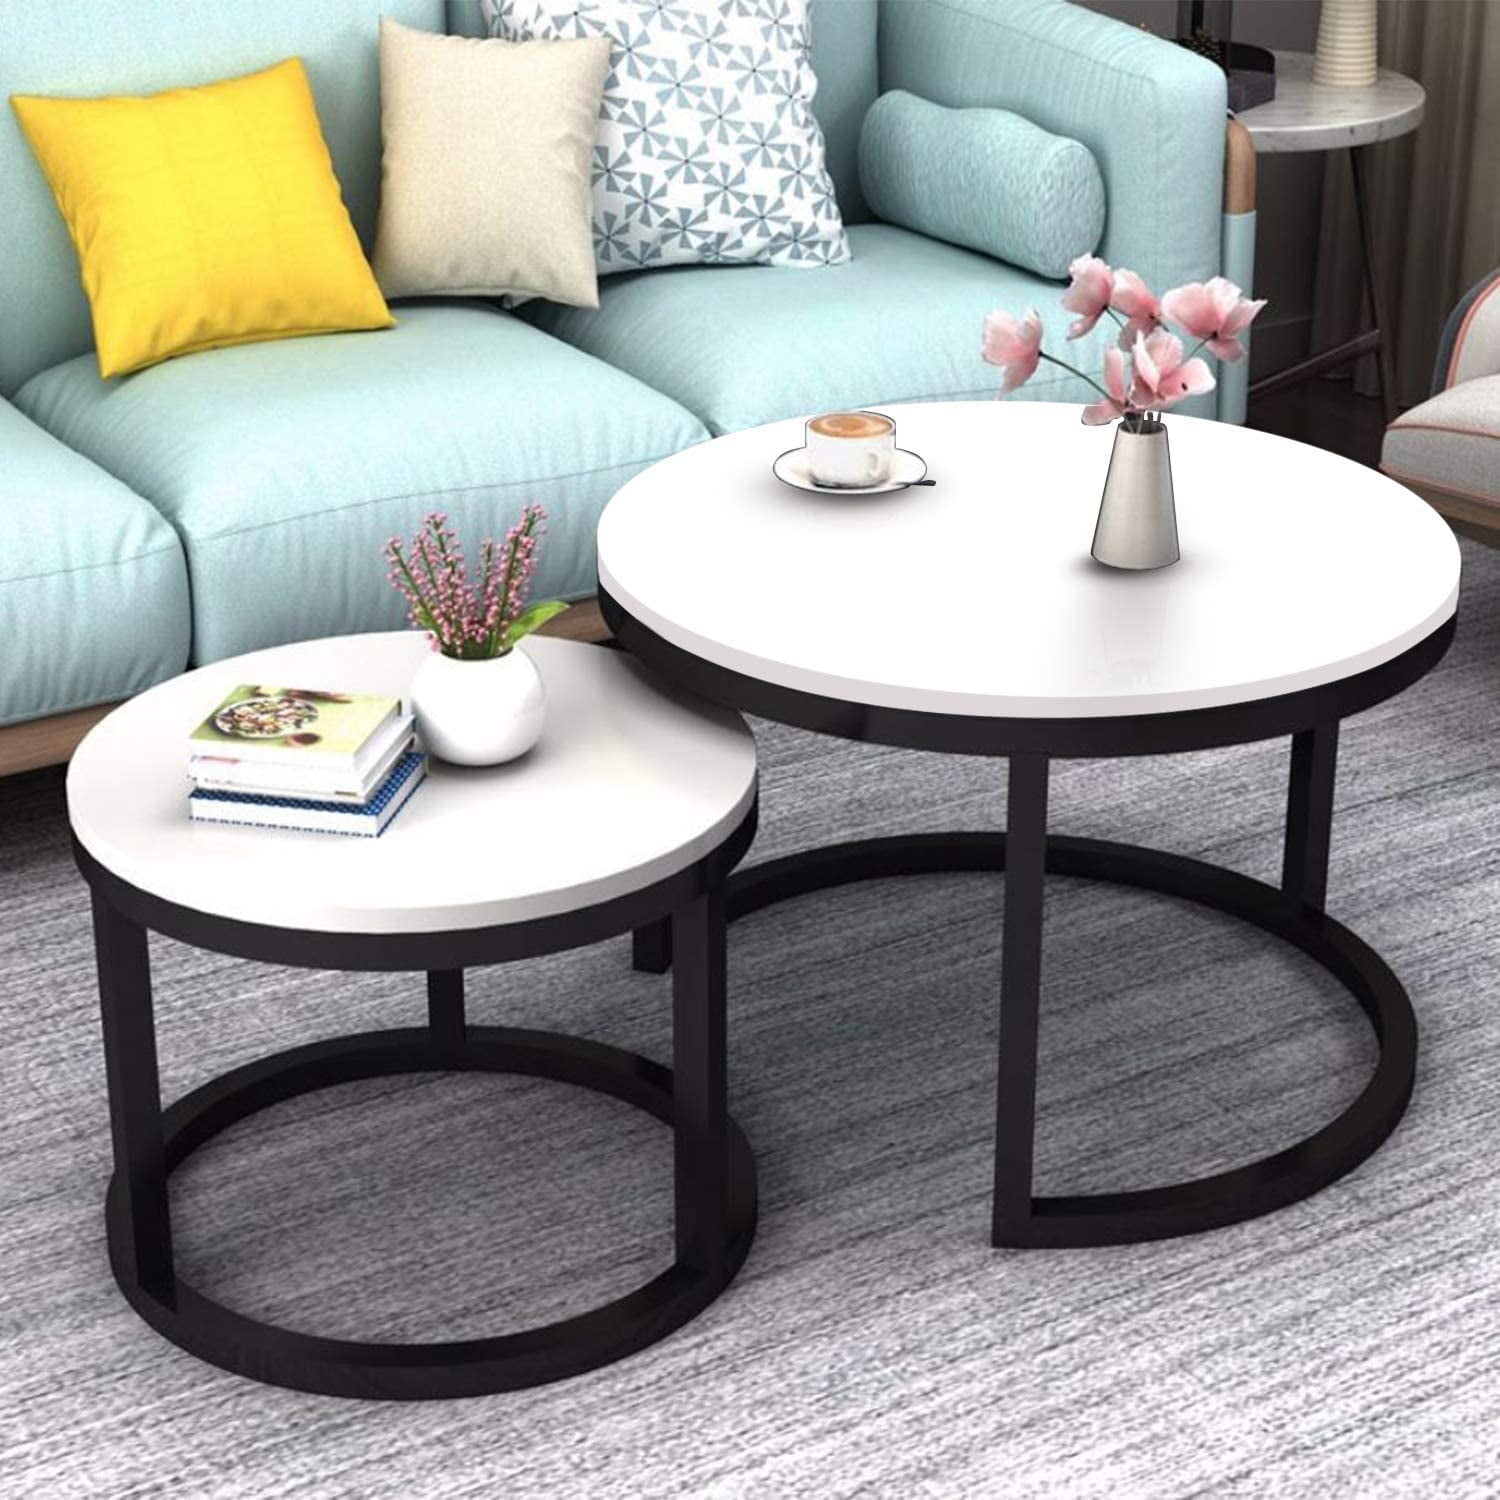 2 Round Tea Table Coffee Table Desk Sets | White - Twin Sets Multi